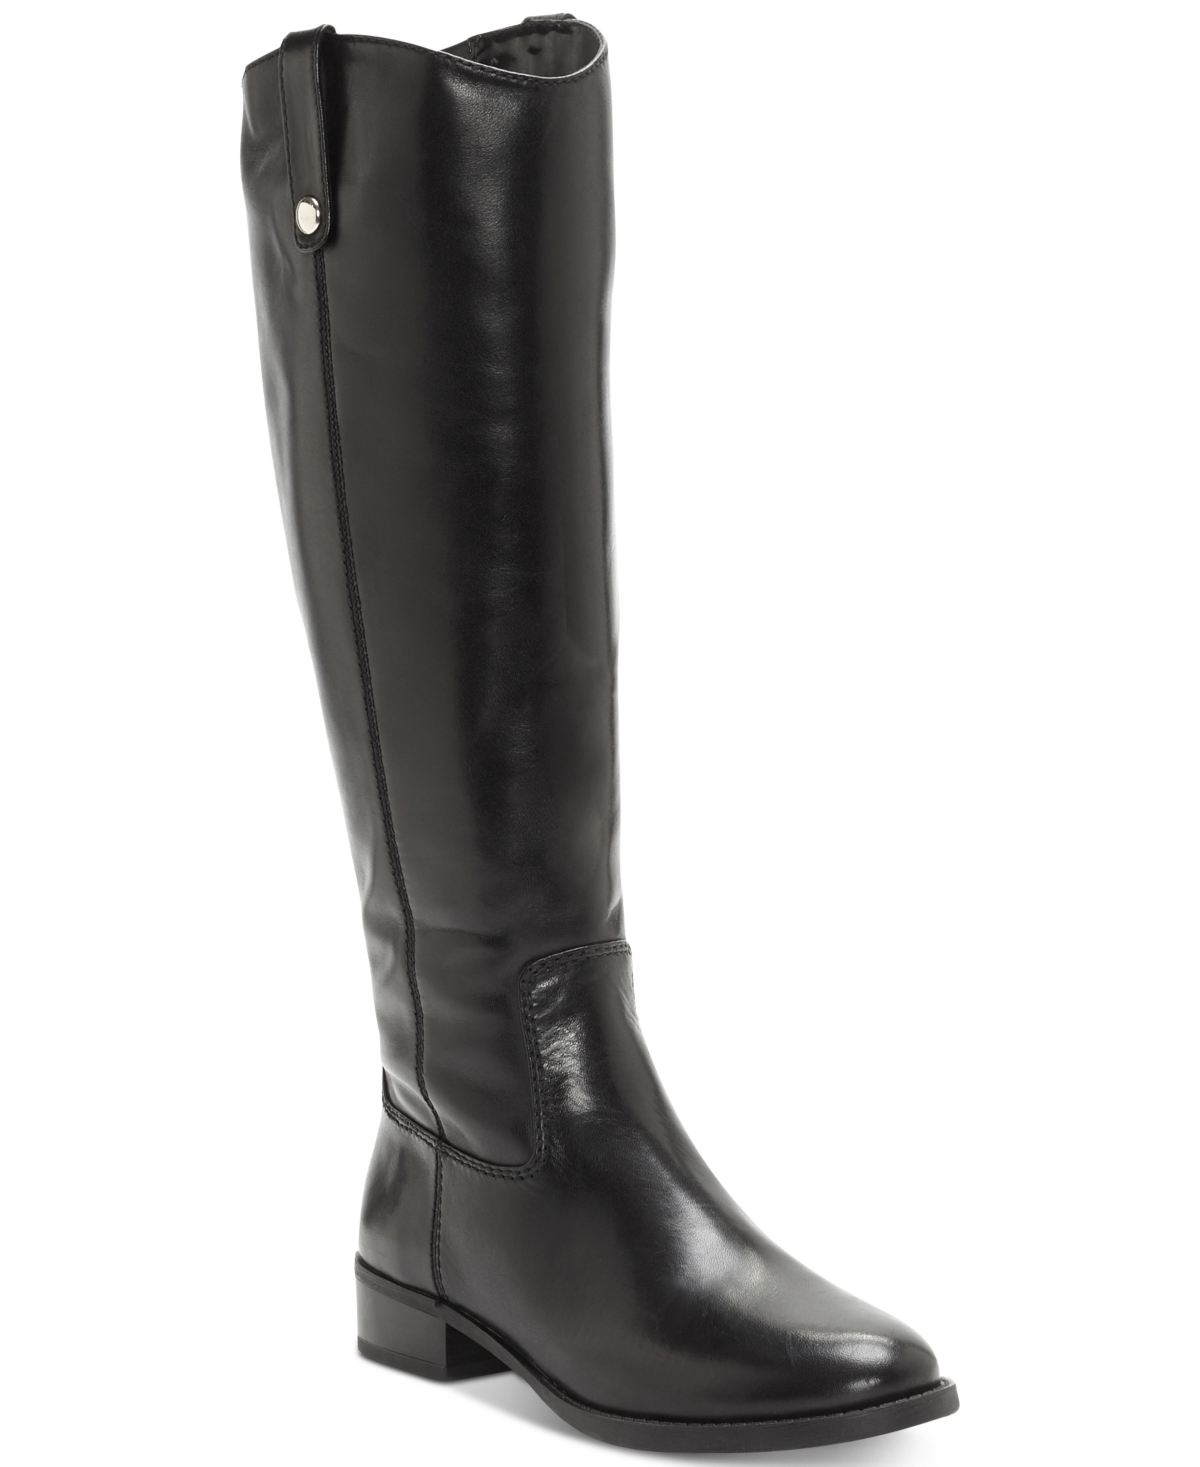 Fawne Riding Leather Boots, Created for Macy's - Black